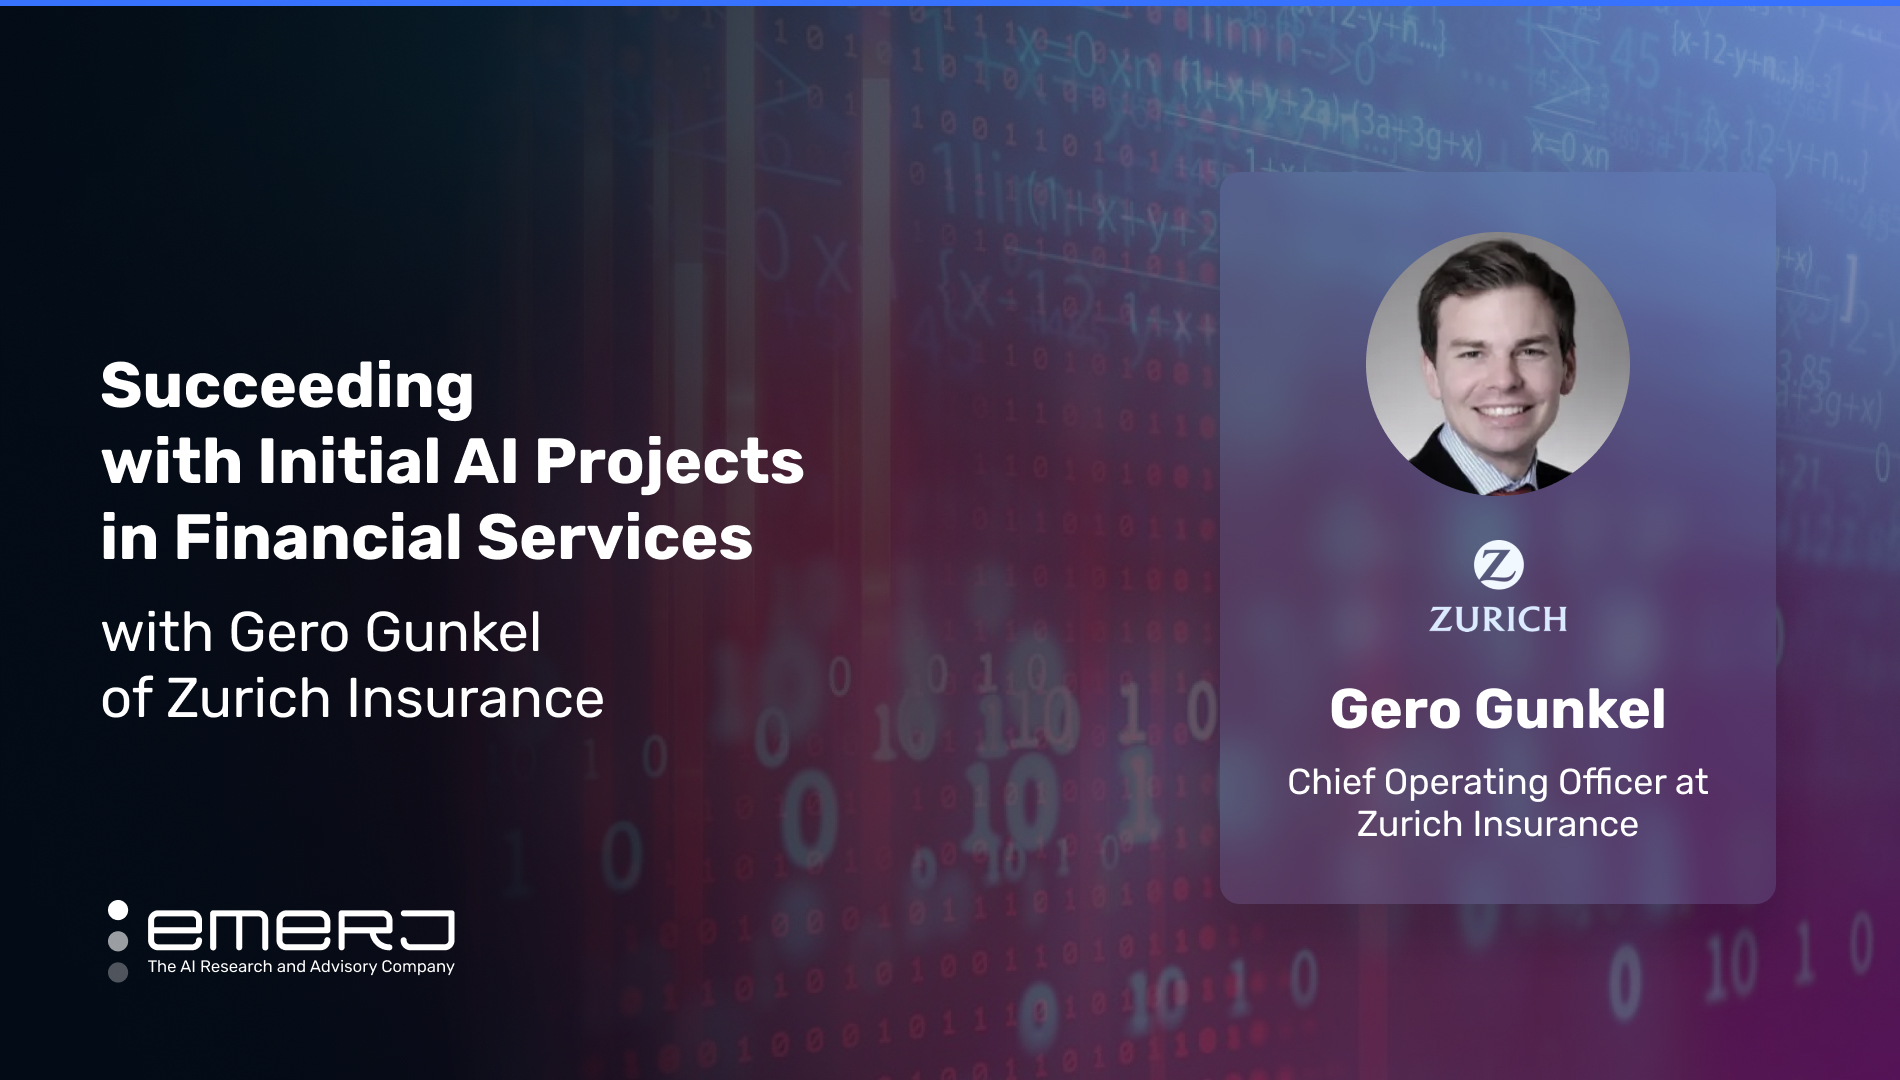 Succeeding with Initial AI Projects in Financial Services – with Gero Gunkel of Zurich Insurance